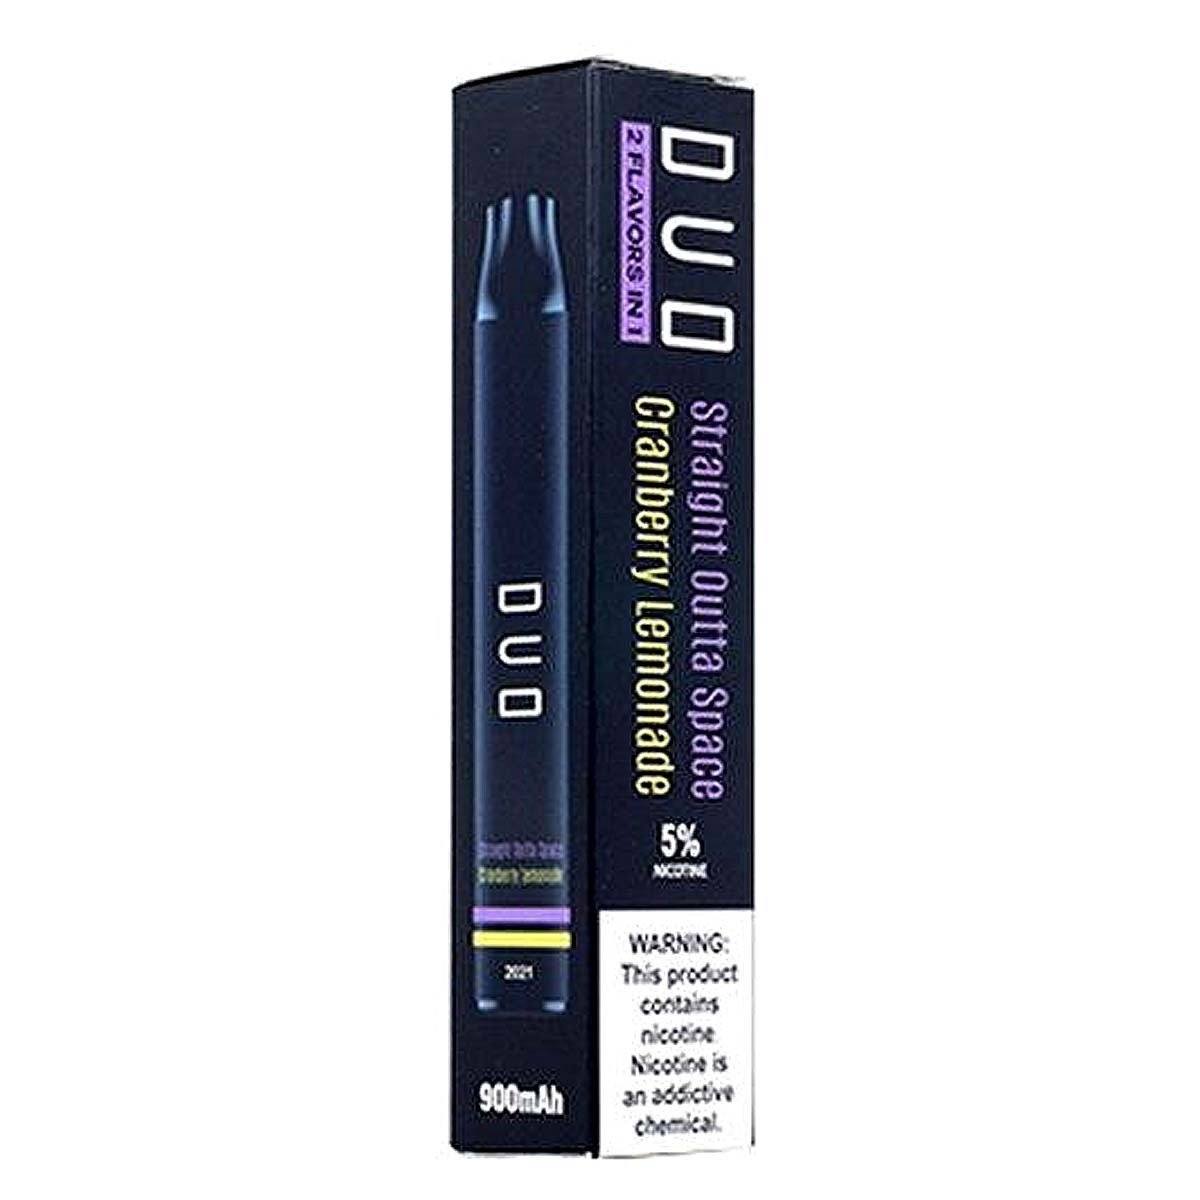 Duo Disposable | 1500 Puffs | 5mL Straight Outta Space Cranberry Lemonade Packaging